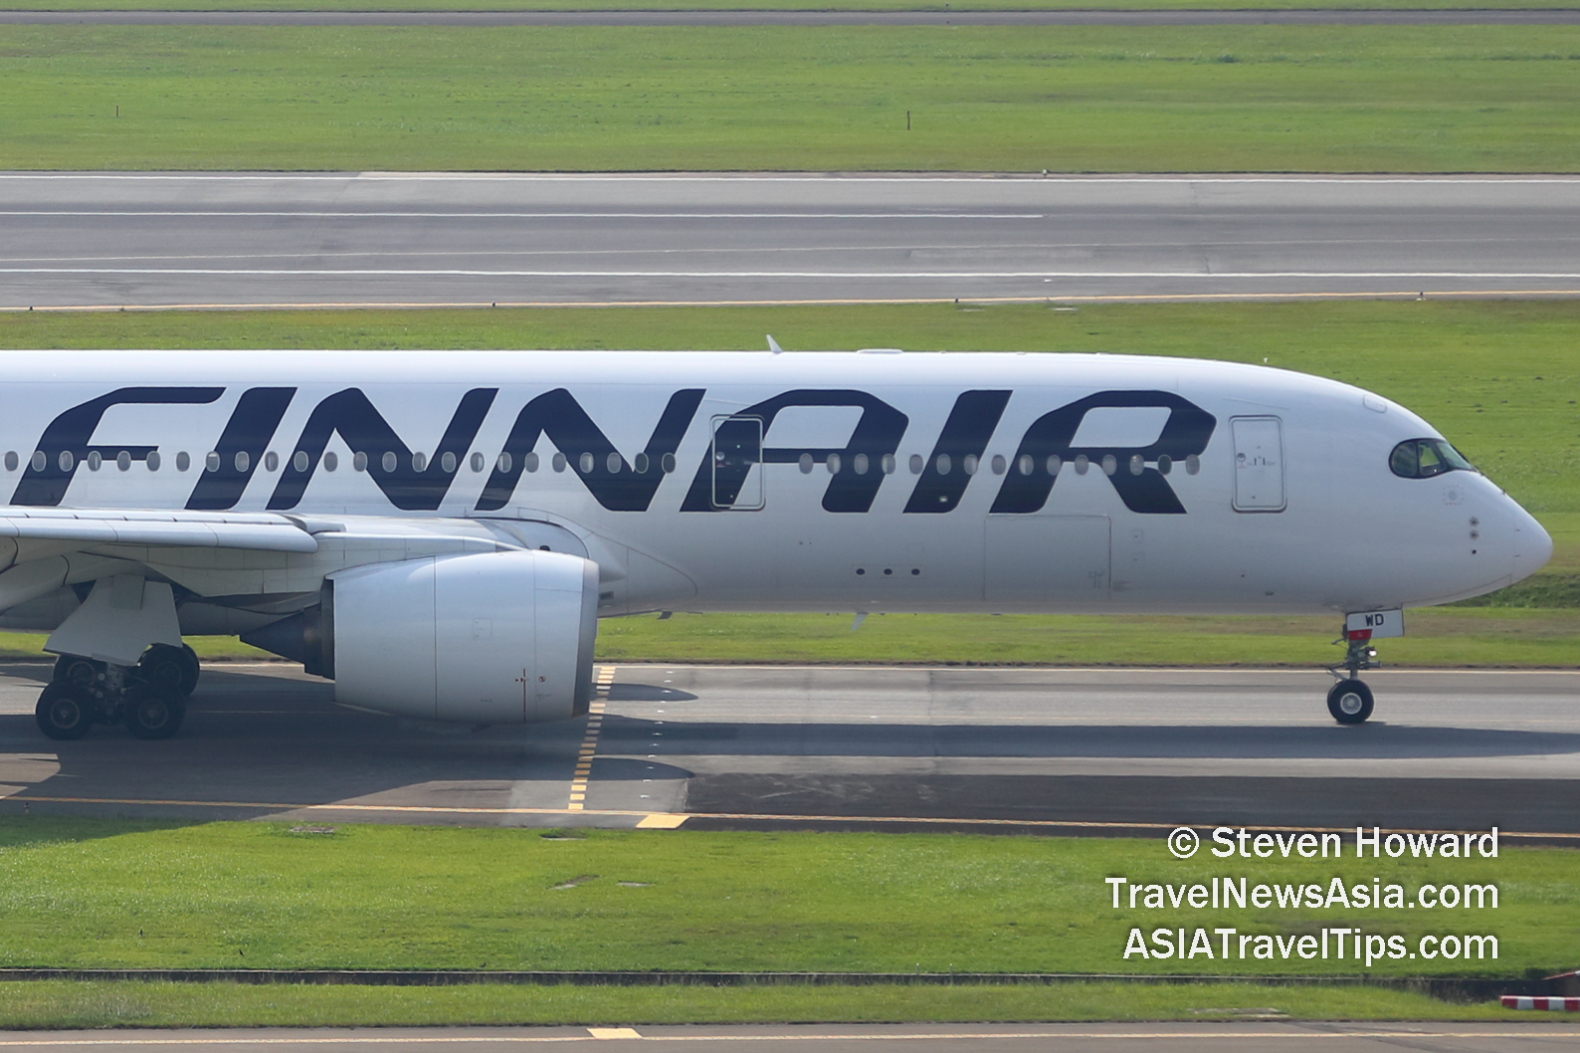 Finnair A350-900 reg: OH-LWD. Picture by Steven Howard of TravelNewsAsia.com Click to enlarge.